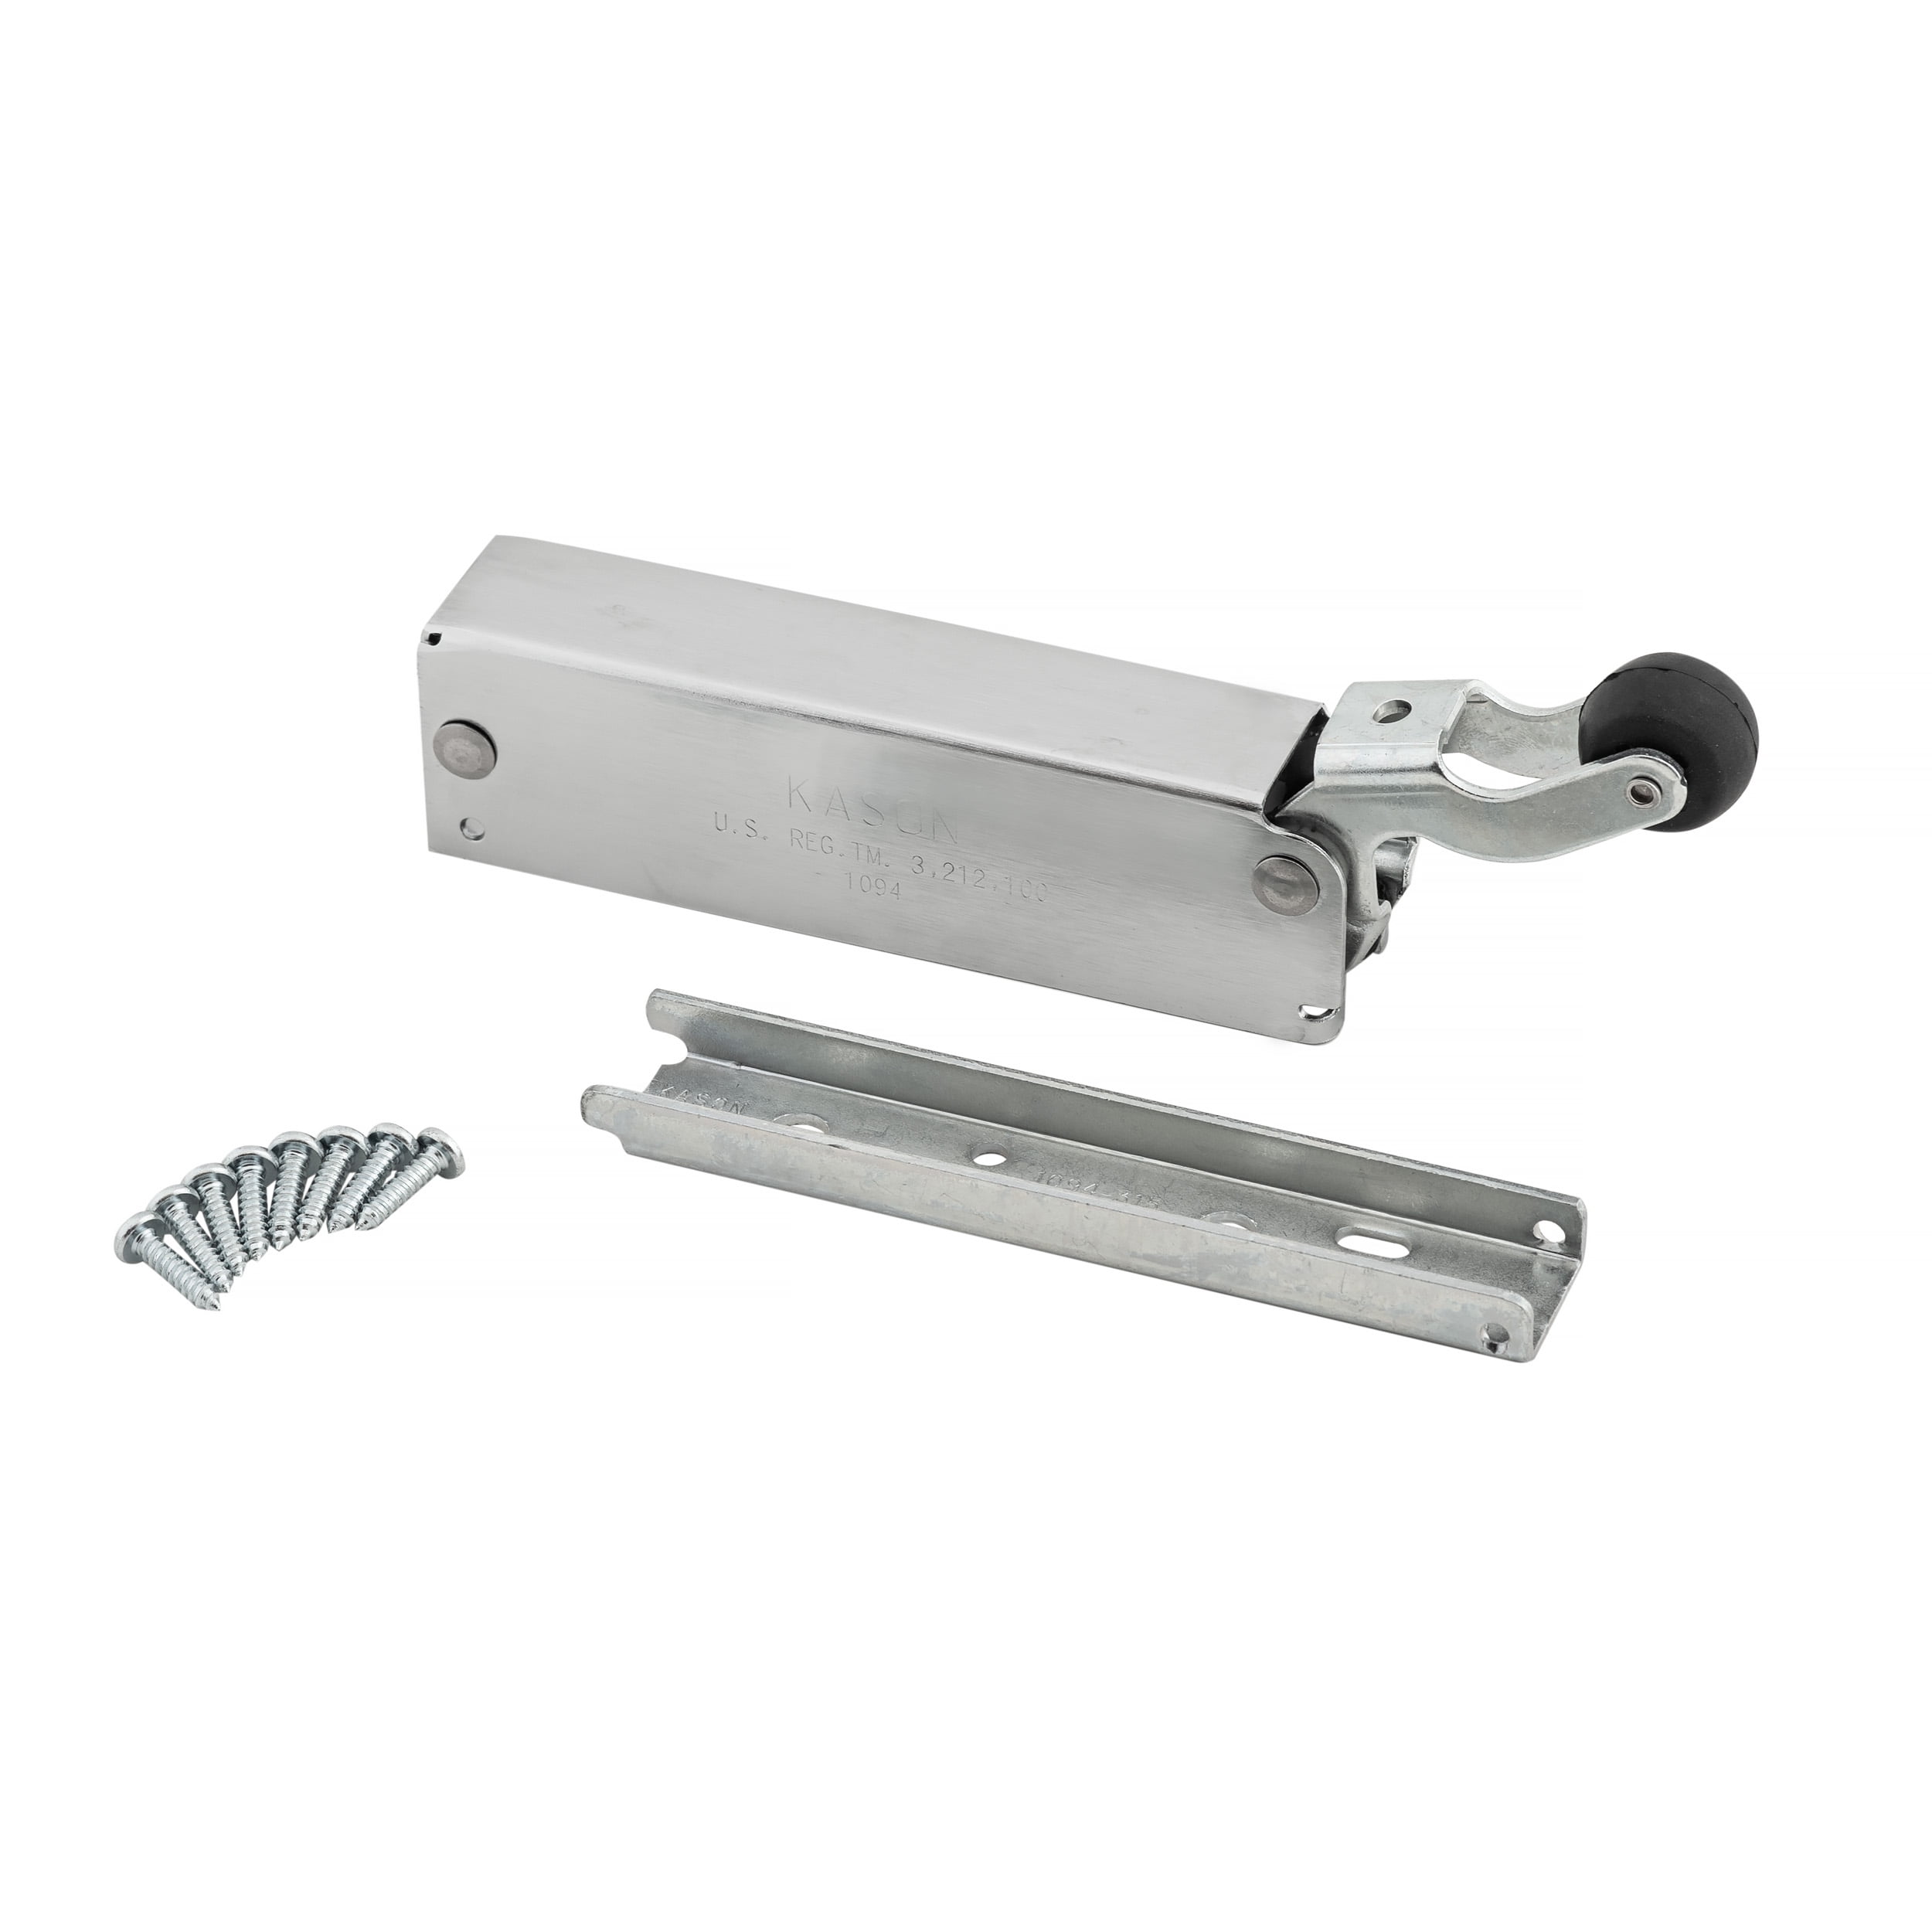 Kason 1094 Sureclose Hydraulic Door Closer, Concealed Mounting, Brushed  Chrome, 11094000012